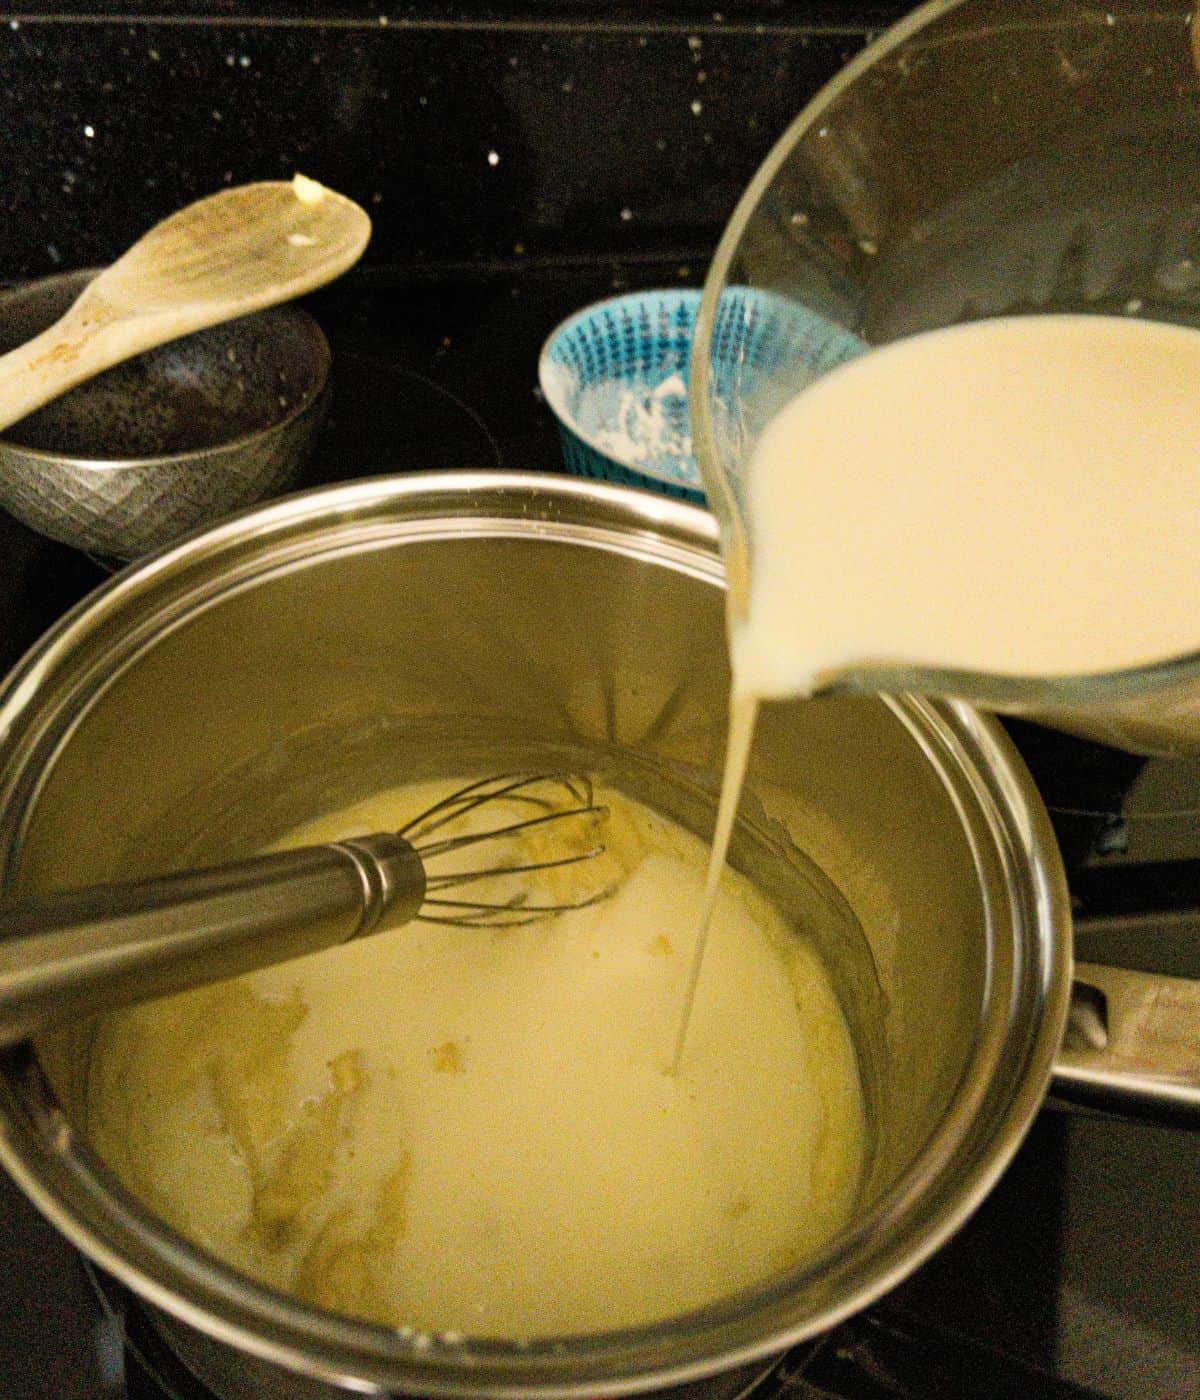 milk being poured into a white sauce in a saucepan.